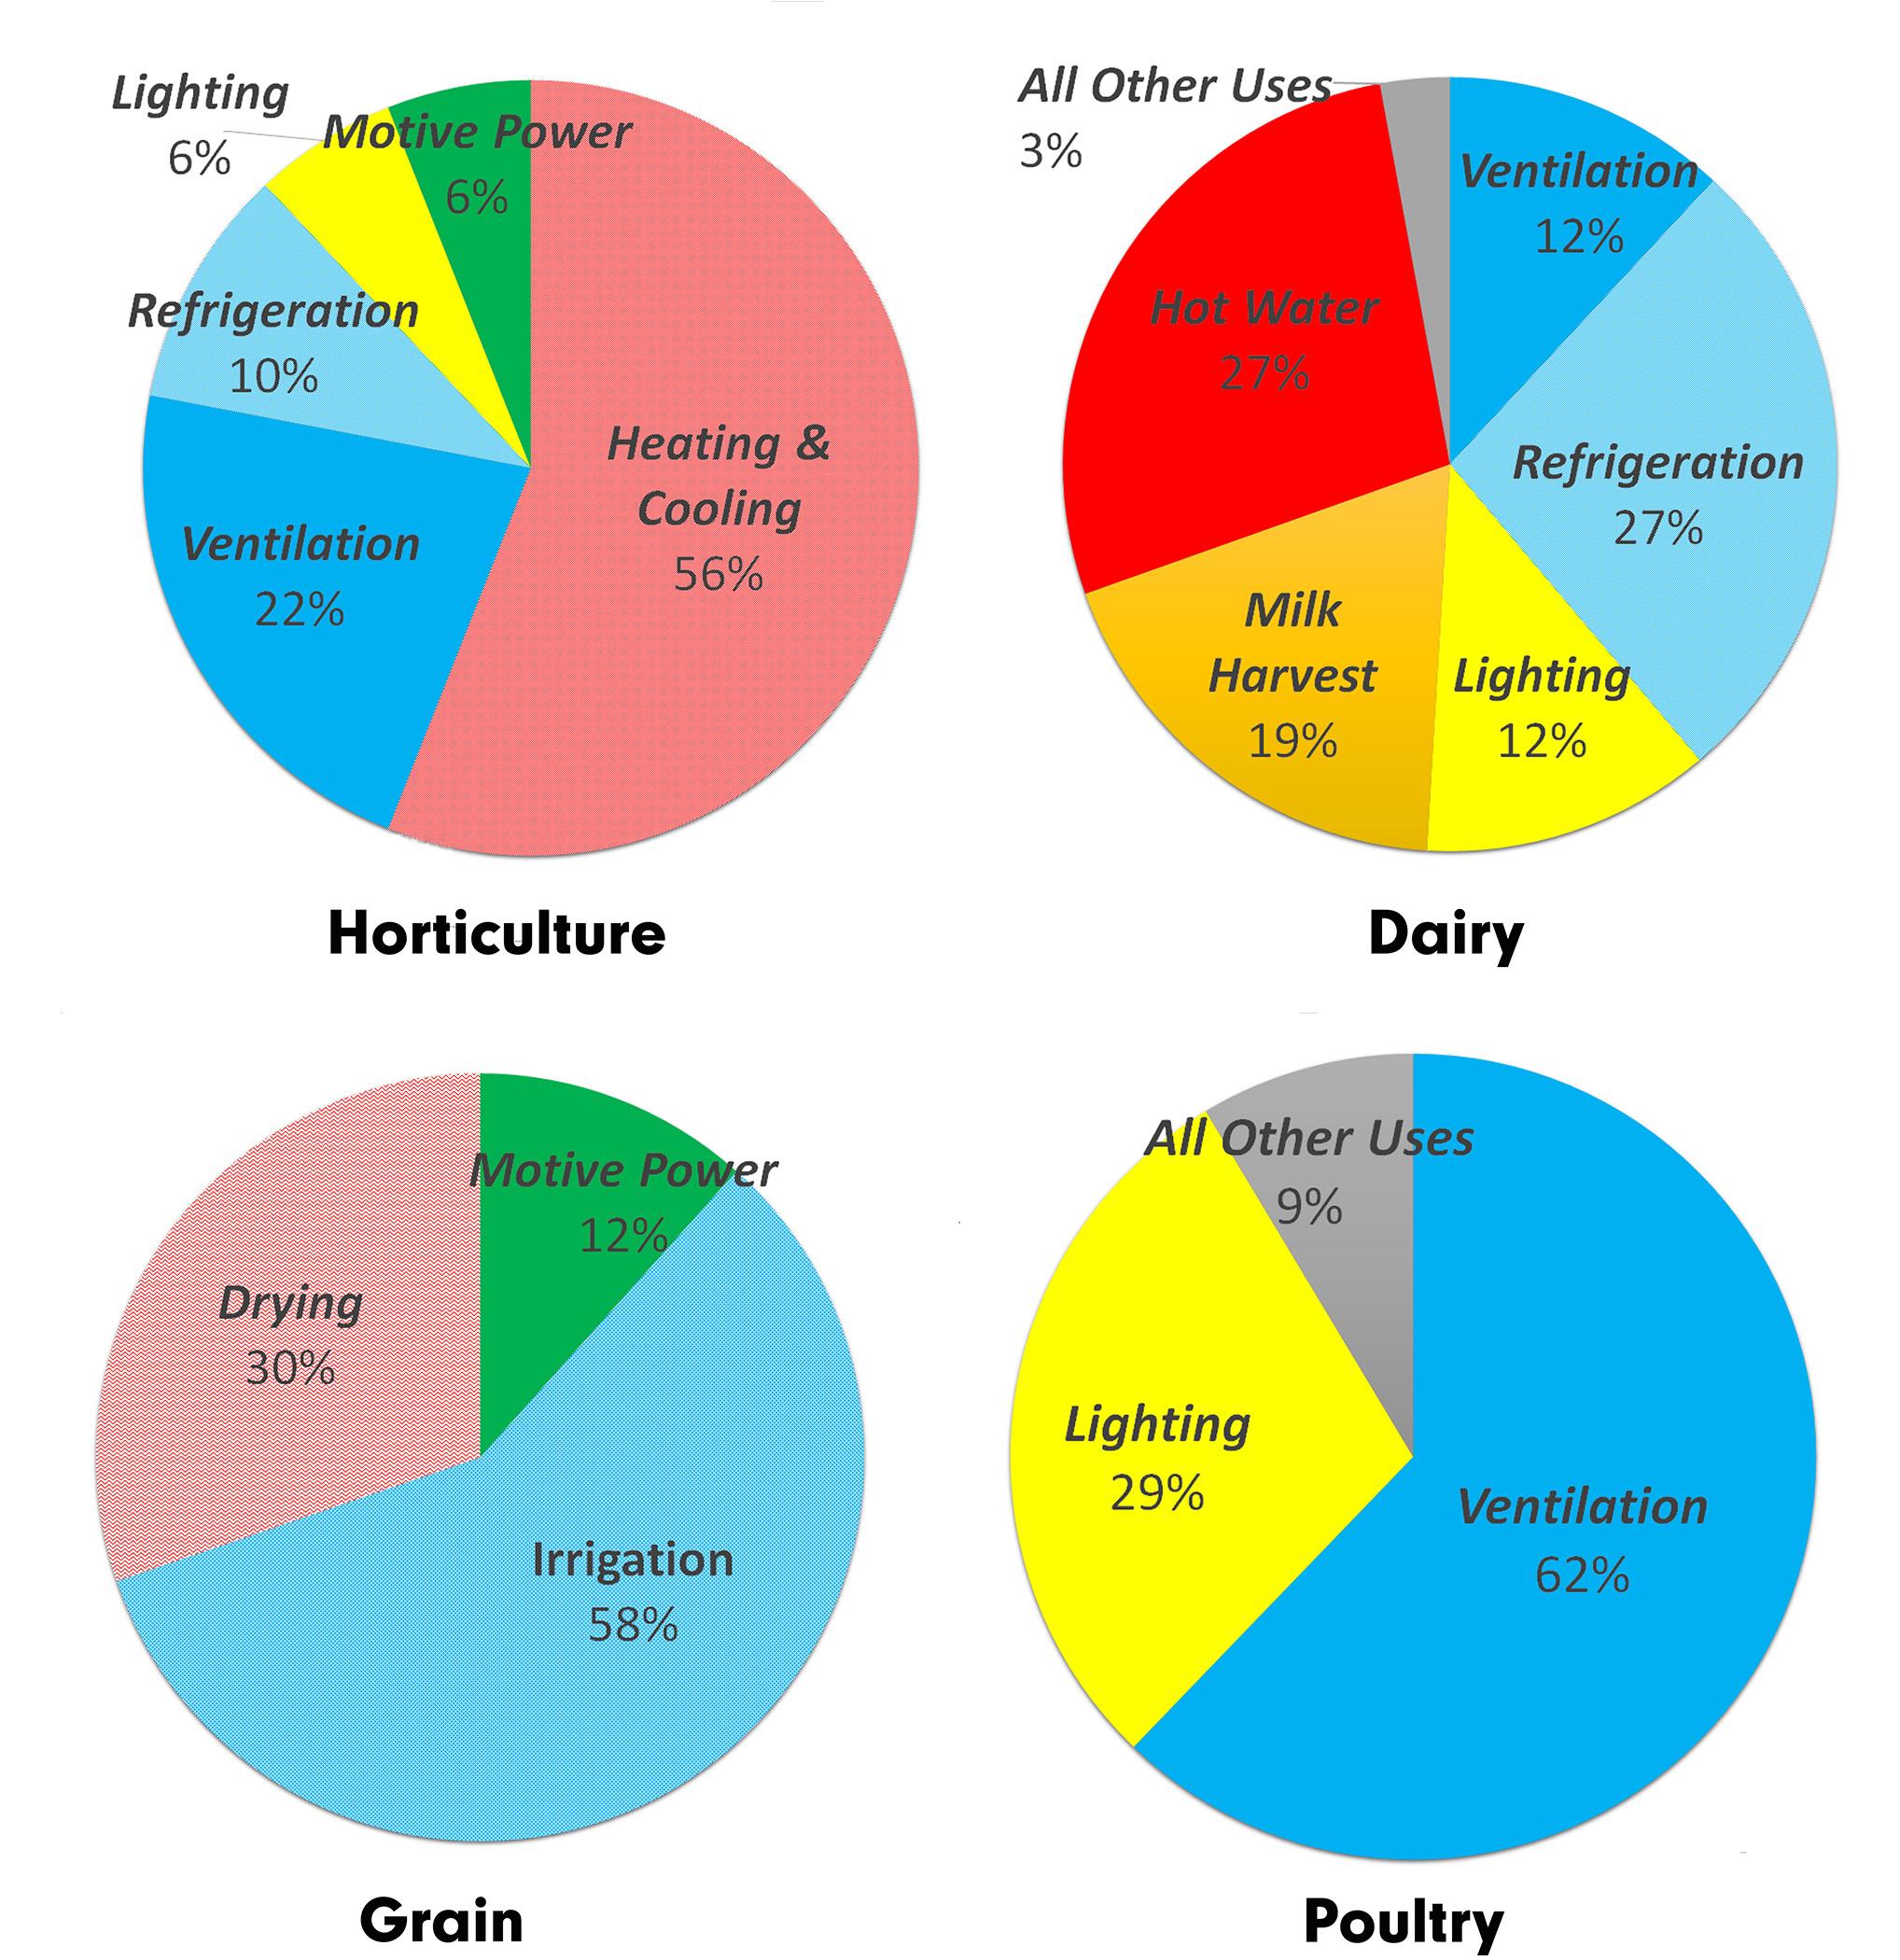 Figure 3: Largest share of energy use varies by type of farm. Data Sources: Clarke & House, 2010; E.ON Energy, 2014; Marseni et al., 2015; Tallaksen, 2016; EnSave, Inc, Audits 2015.